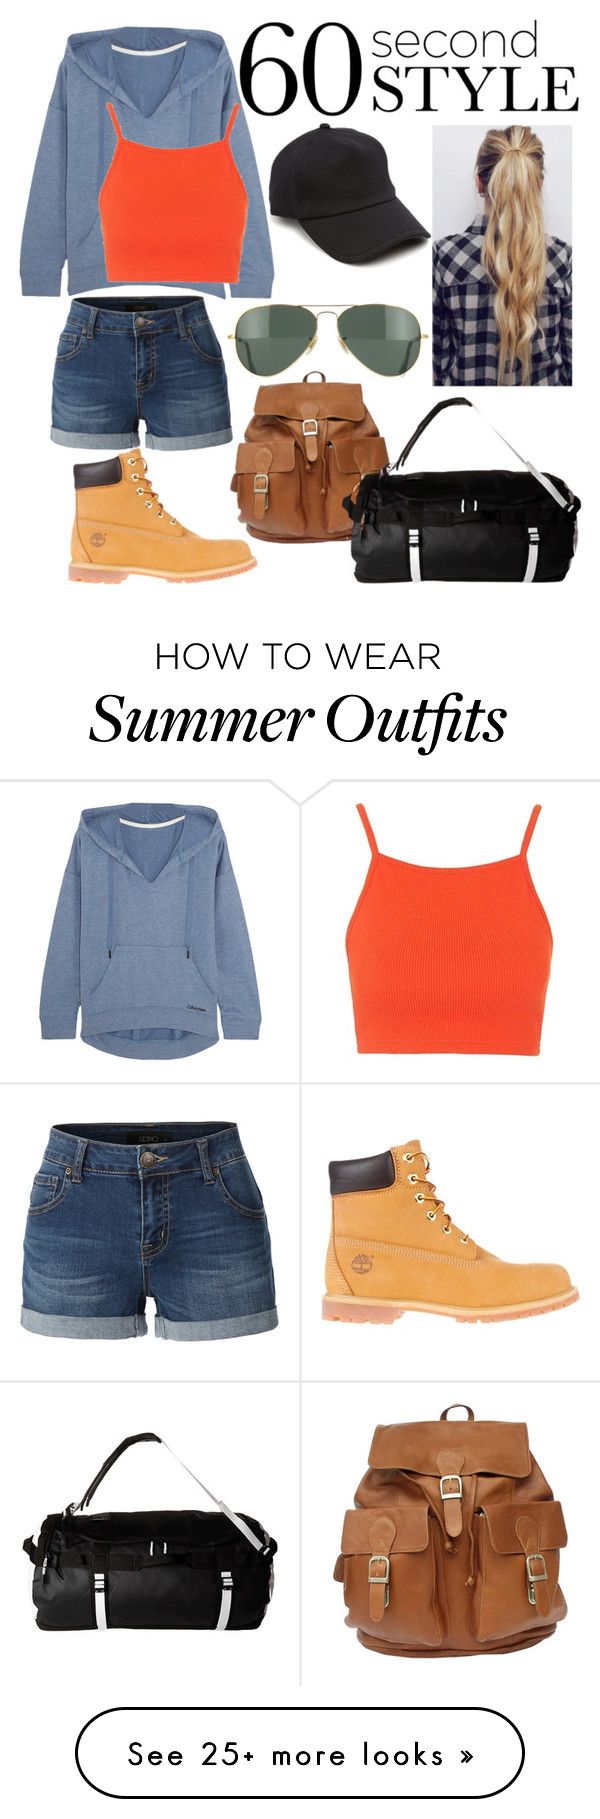 "60 sec summer camp Outfit: CONTEST" by alondrathequeen on Polyvore fe...